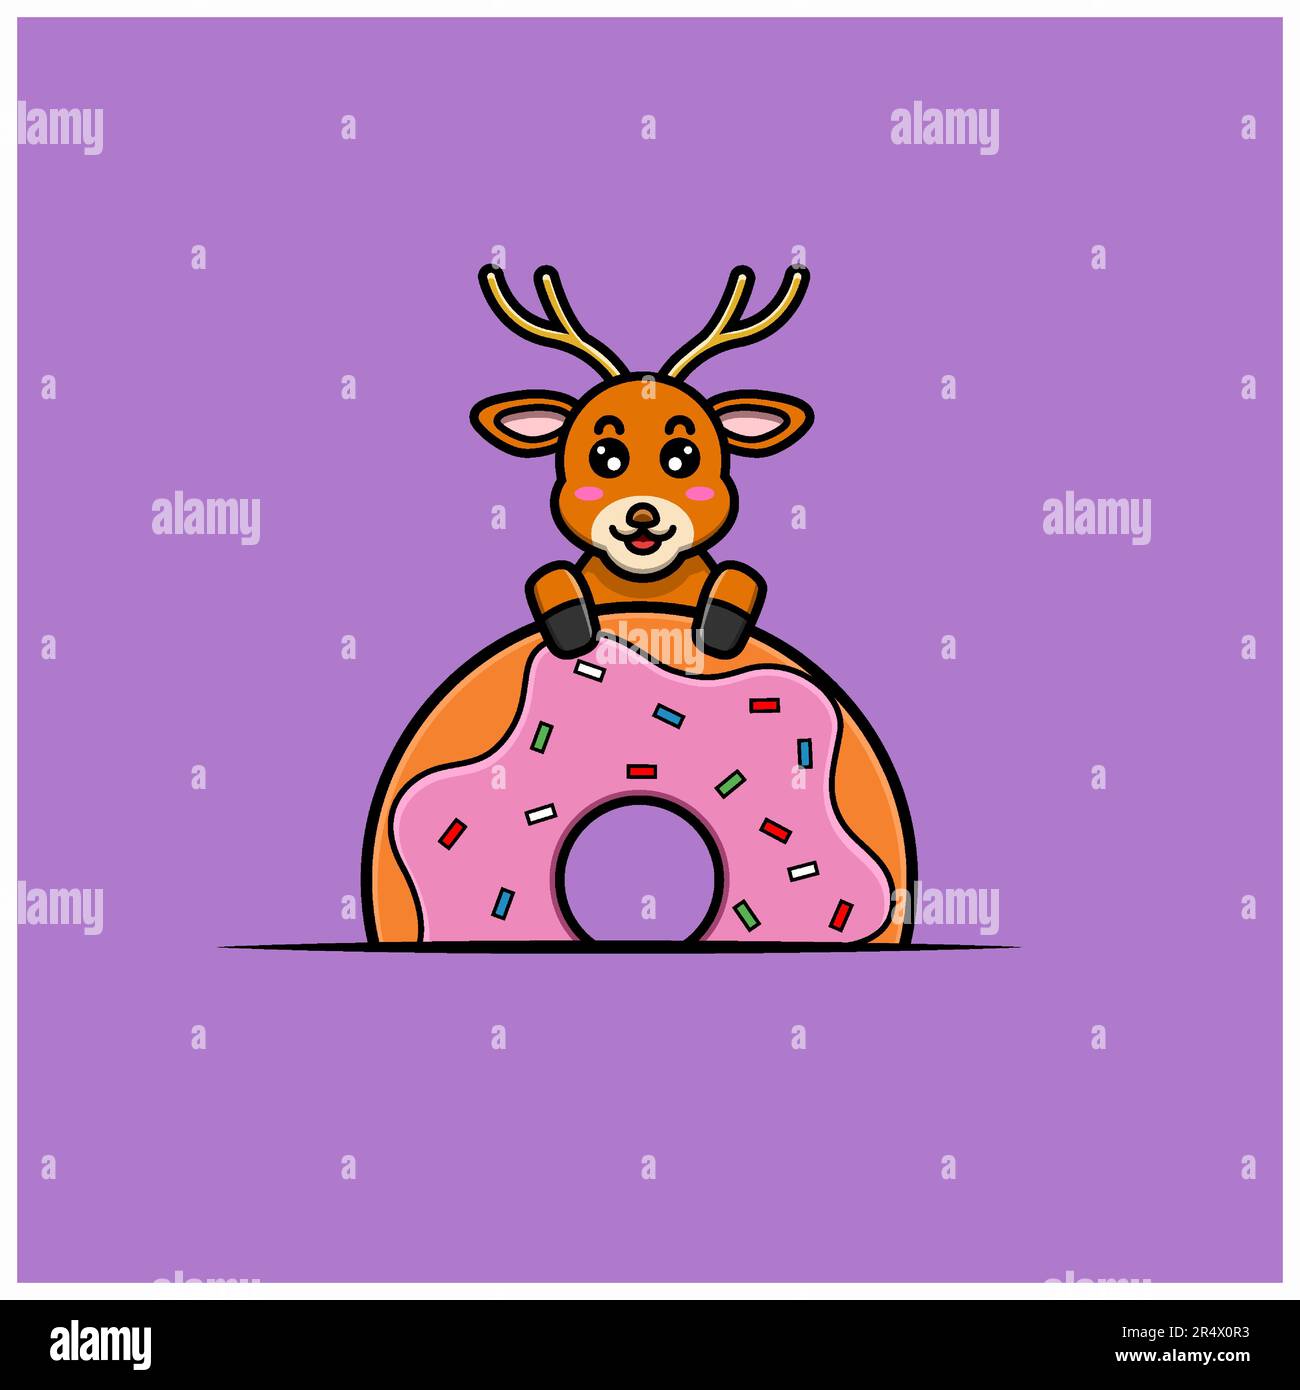 Cute Baby Deer Character On Donut. Character, Mascot, Icon, and Cute Design. Vector and Illustration. Stock Vector